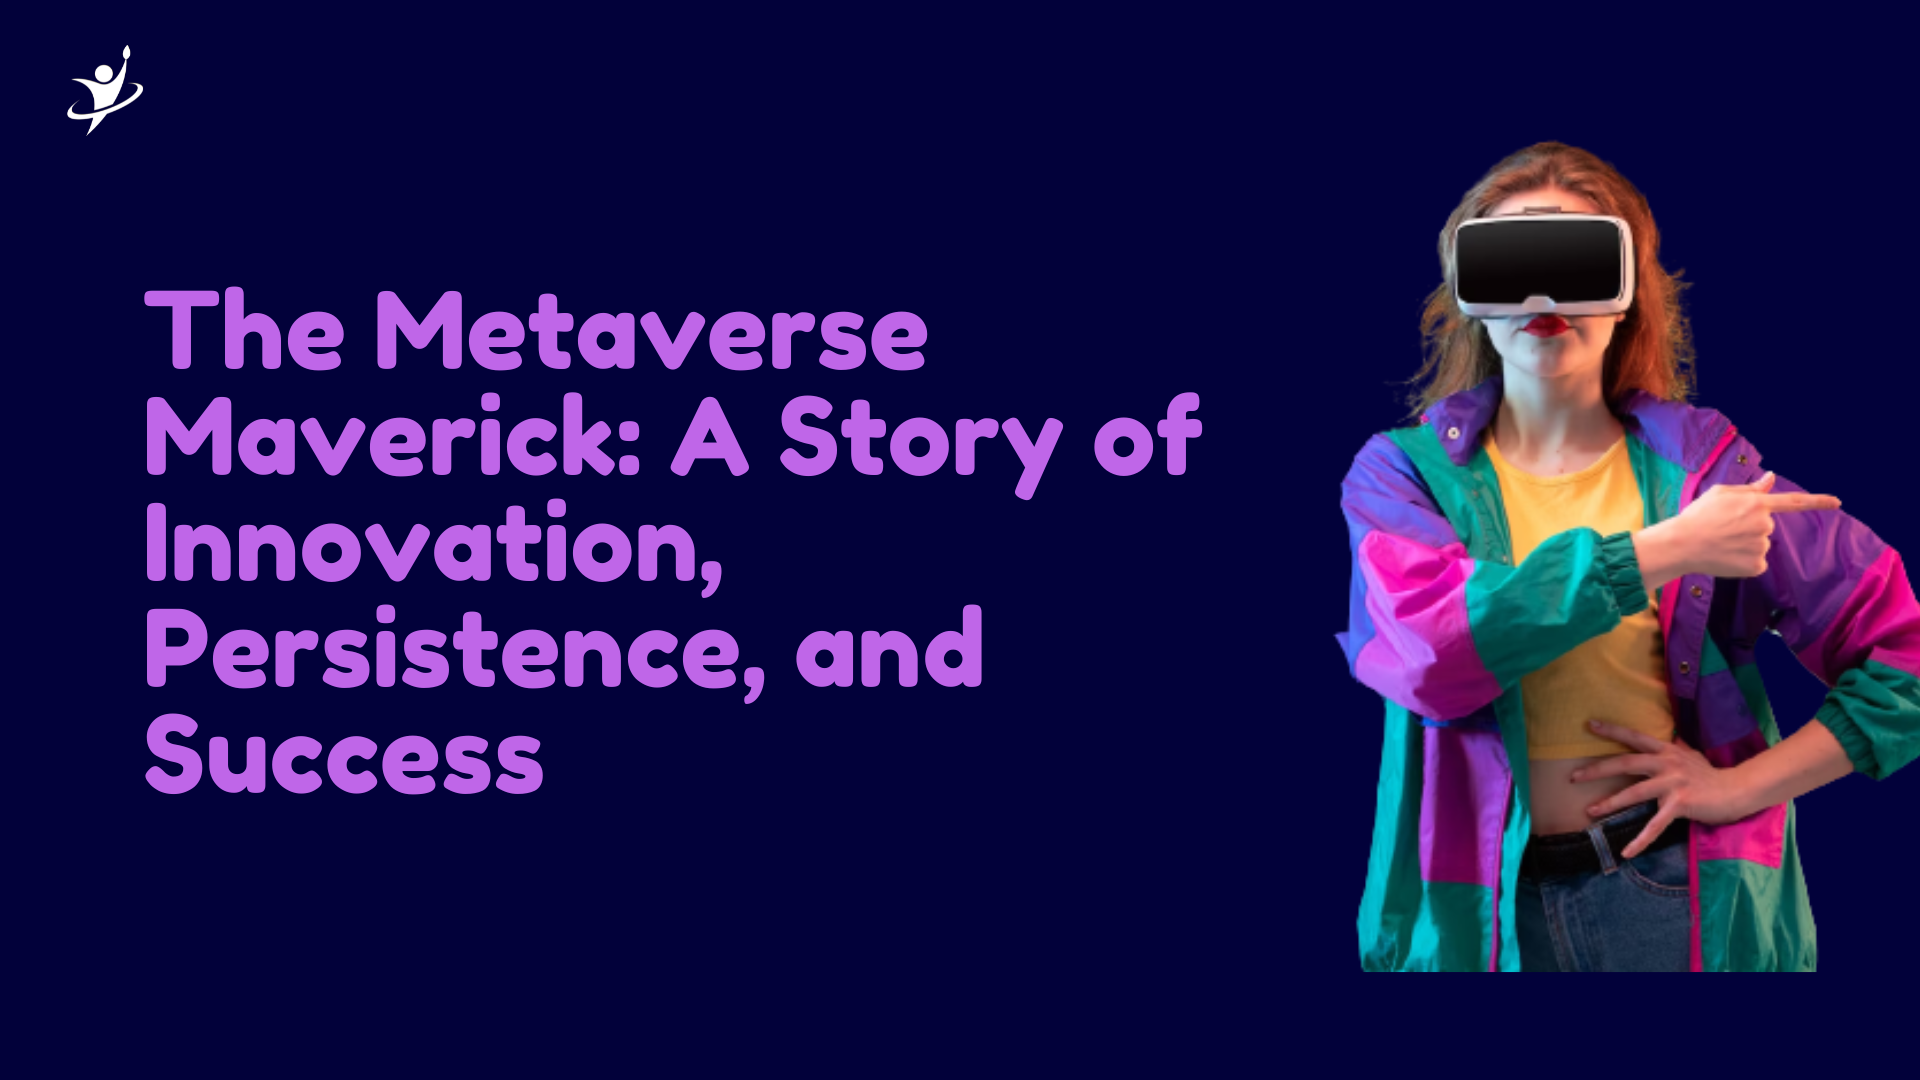 The Metaverse Maverick: A Story of Innovation, Persistence, and Success